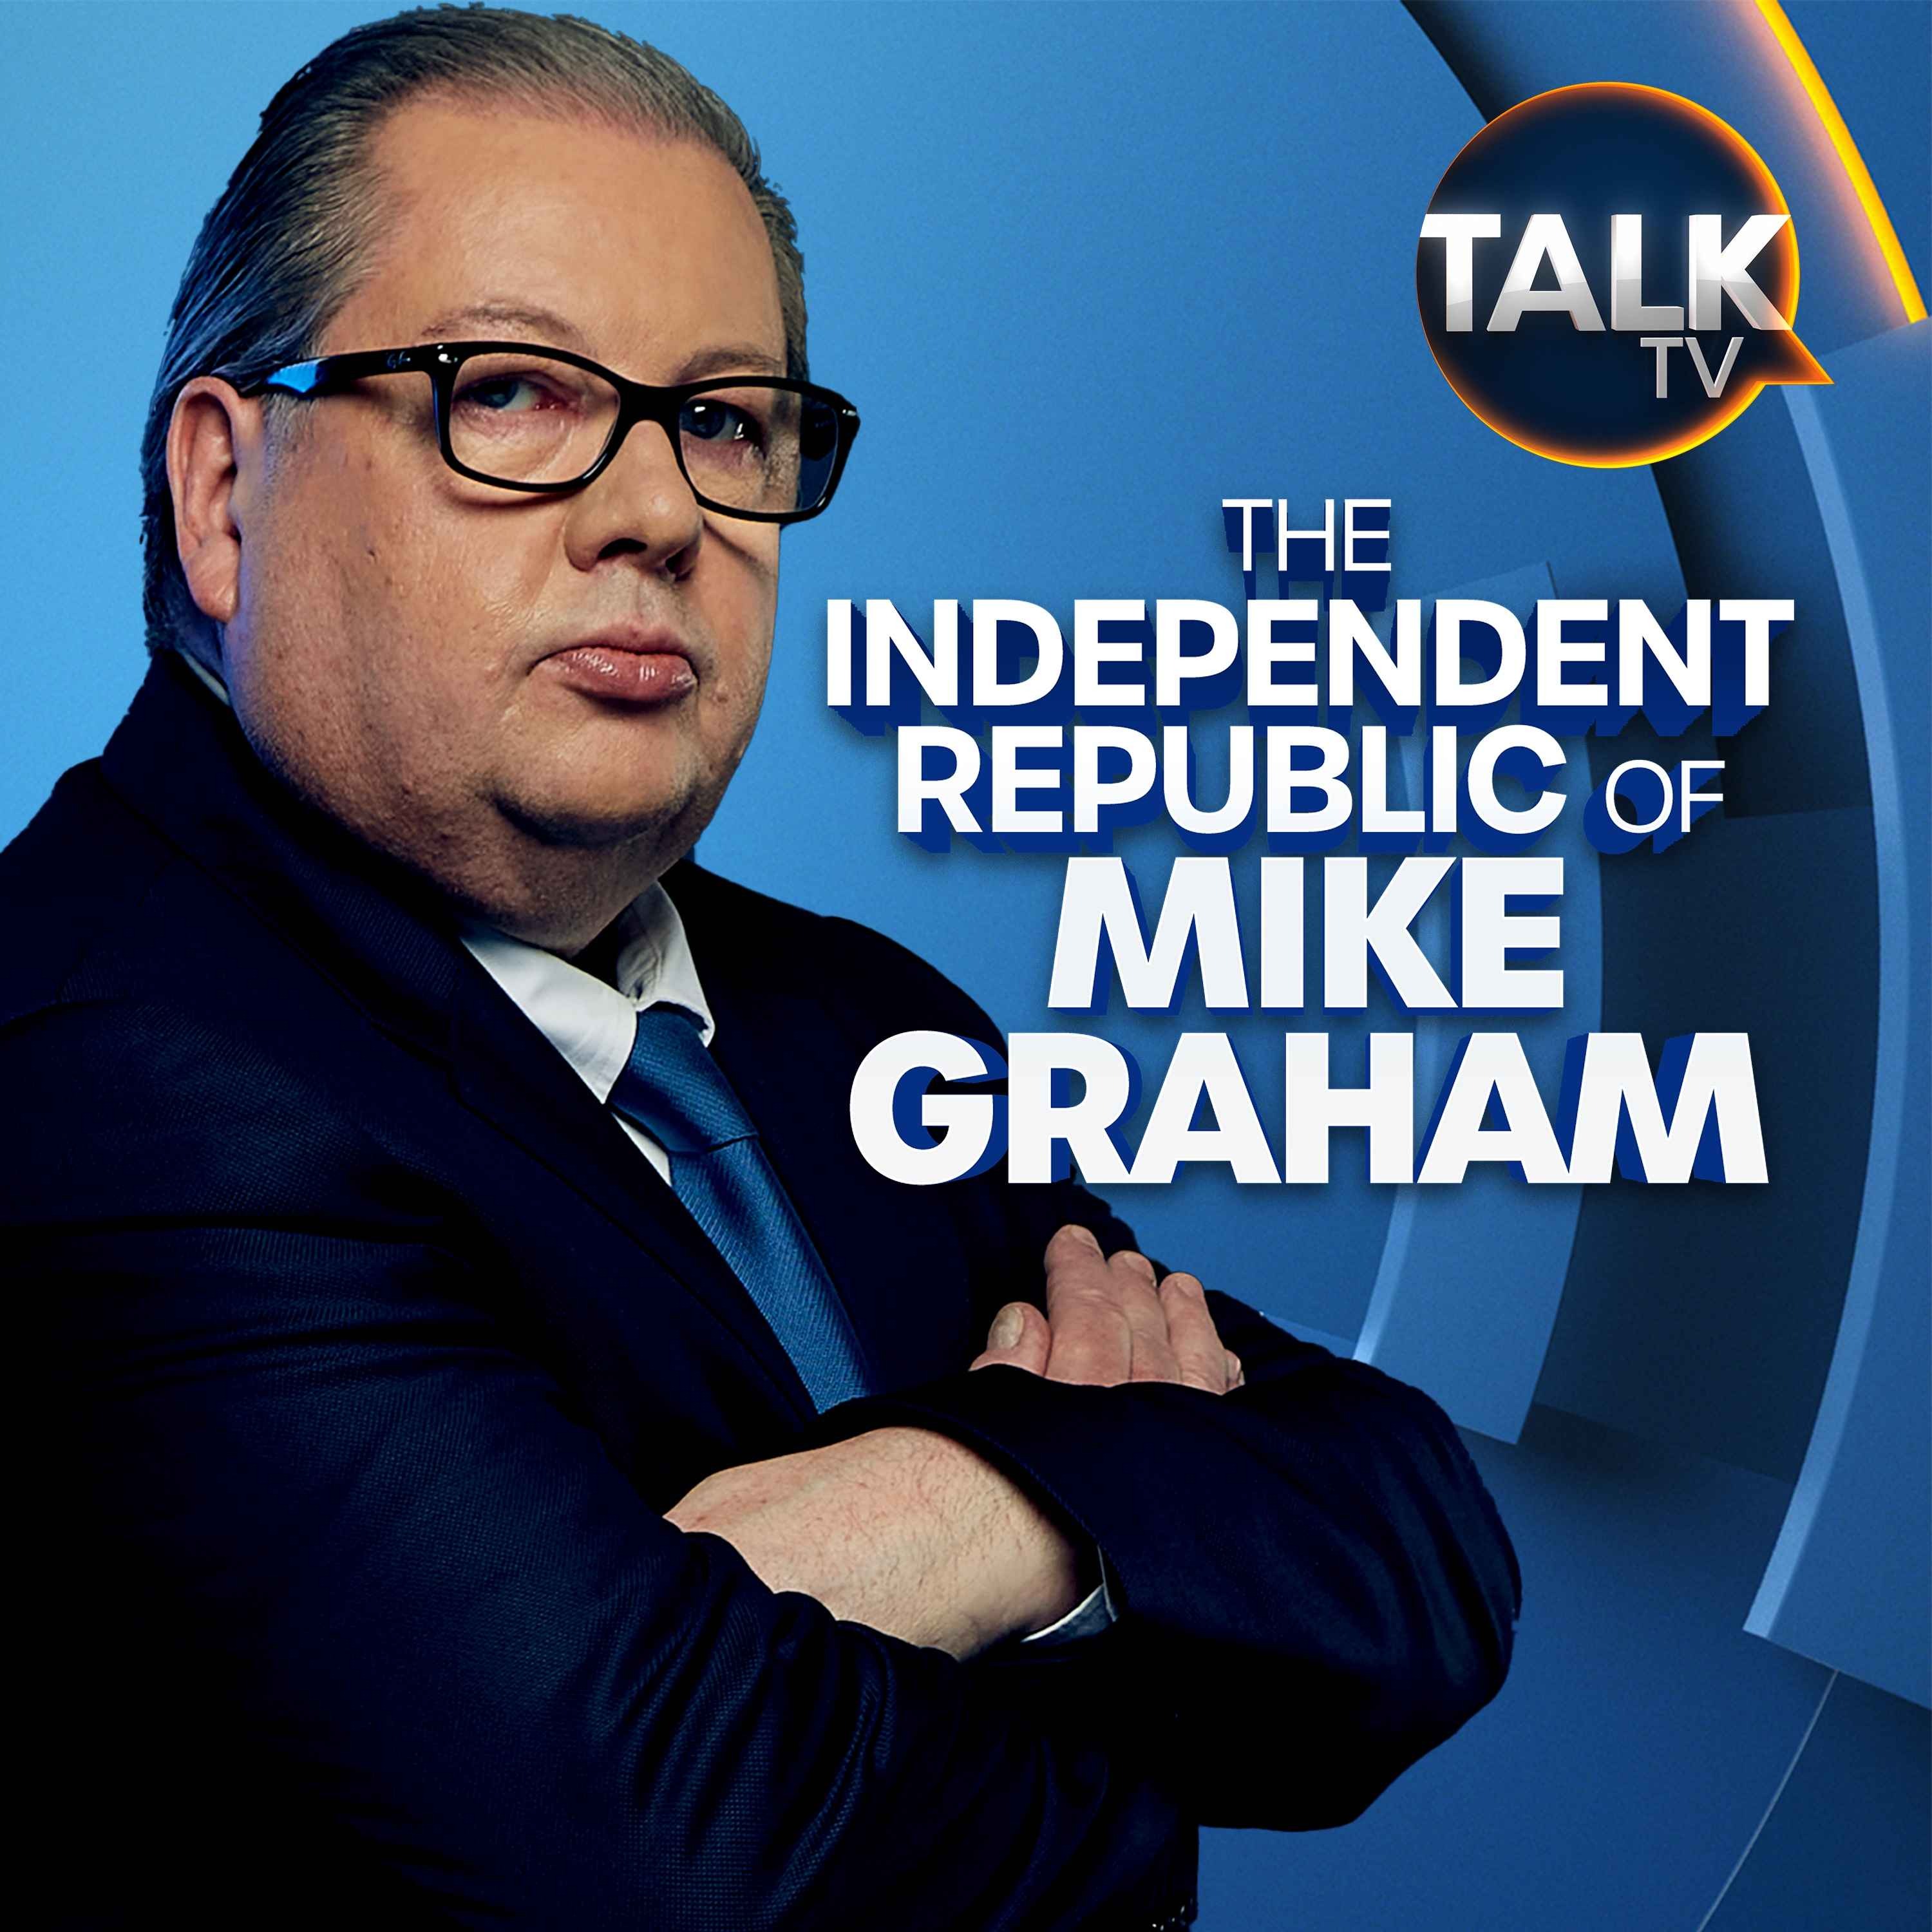 The Independent Republic of Mike Graham on acast